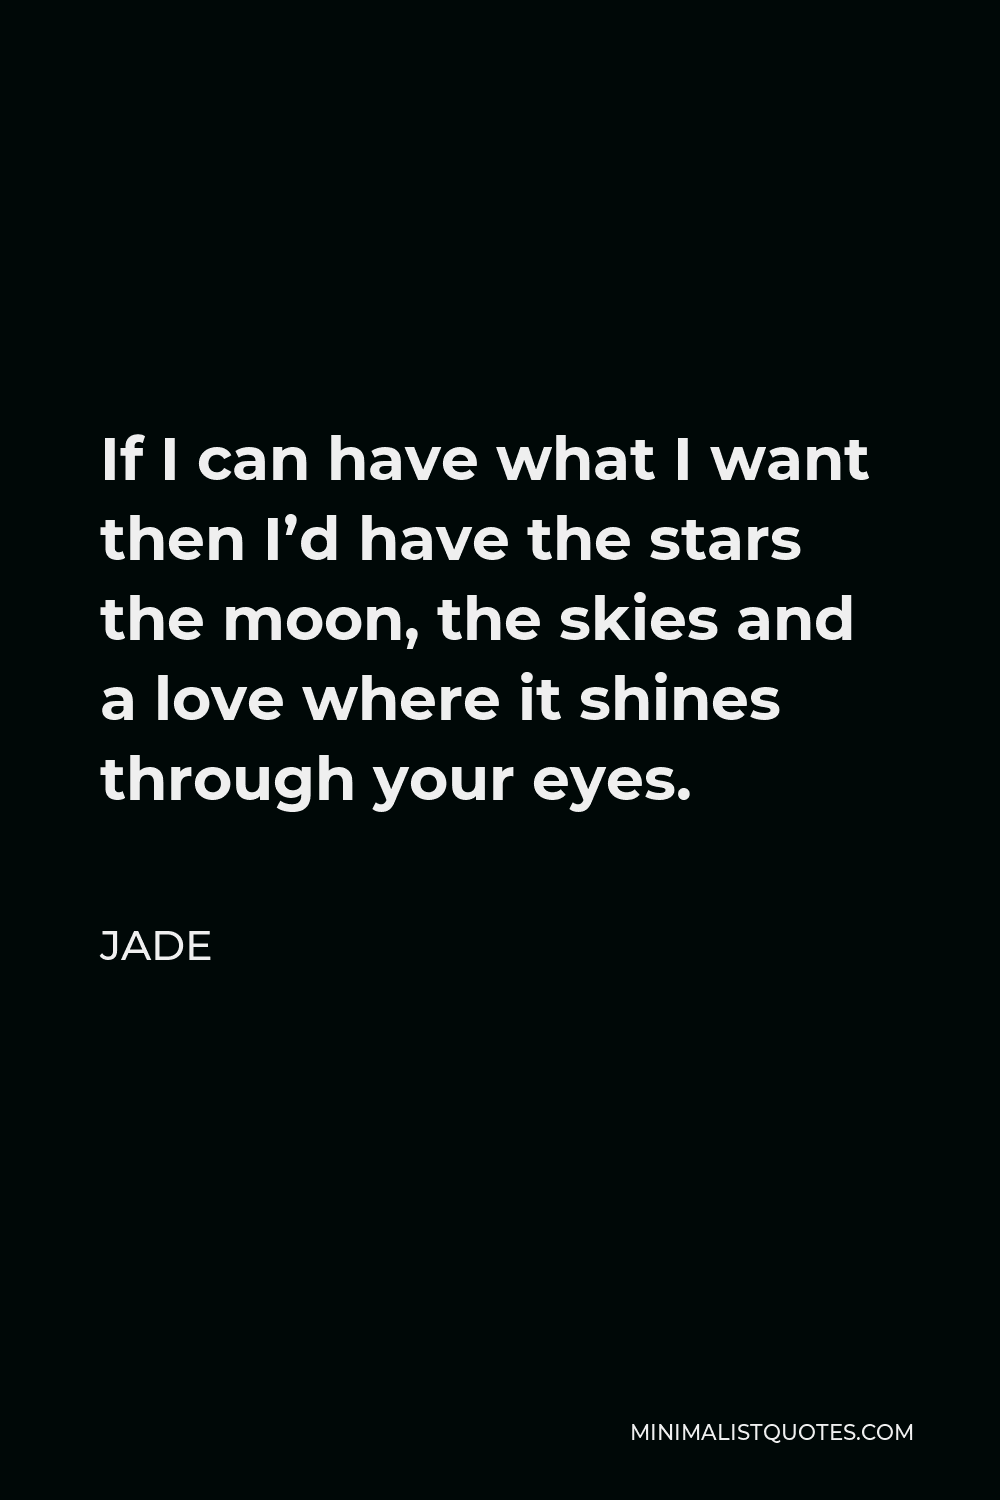 Jade Quote - If I can have what I want then I’d have the stars the moon, the skies and a love where it shines through your eyes.